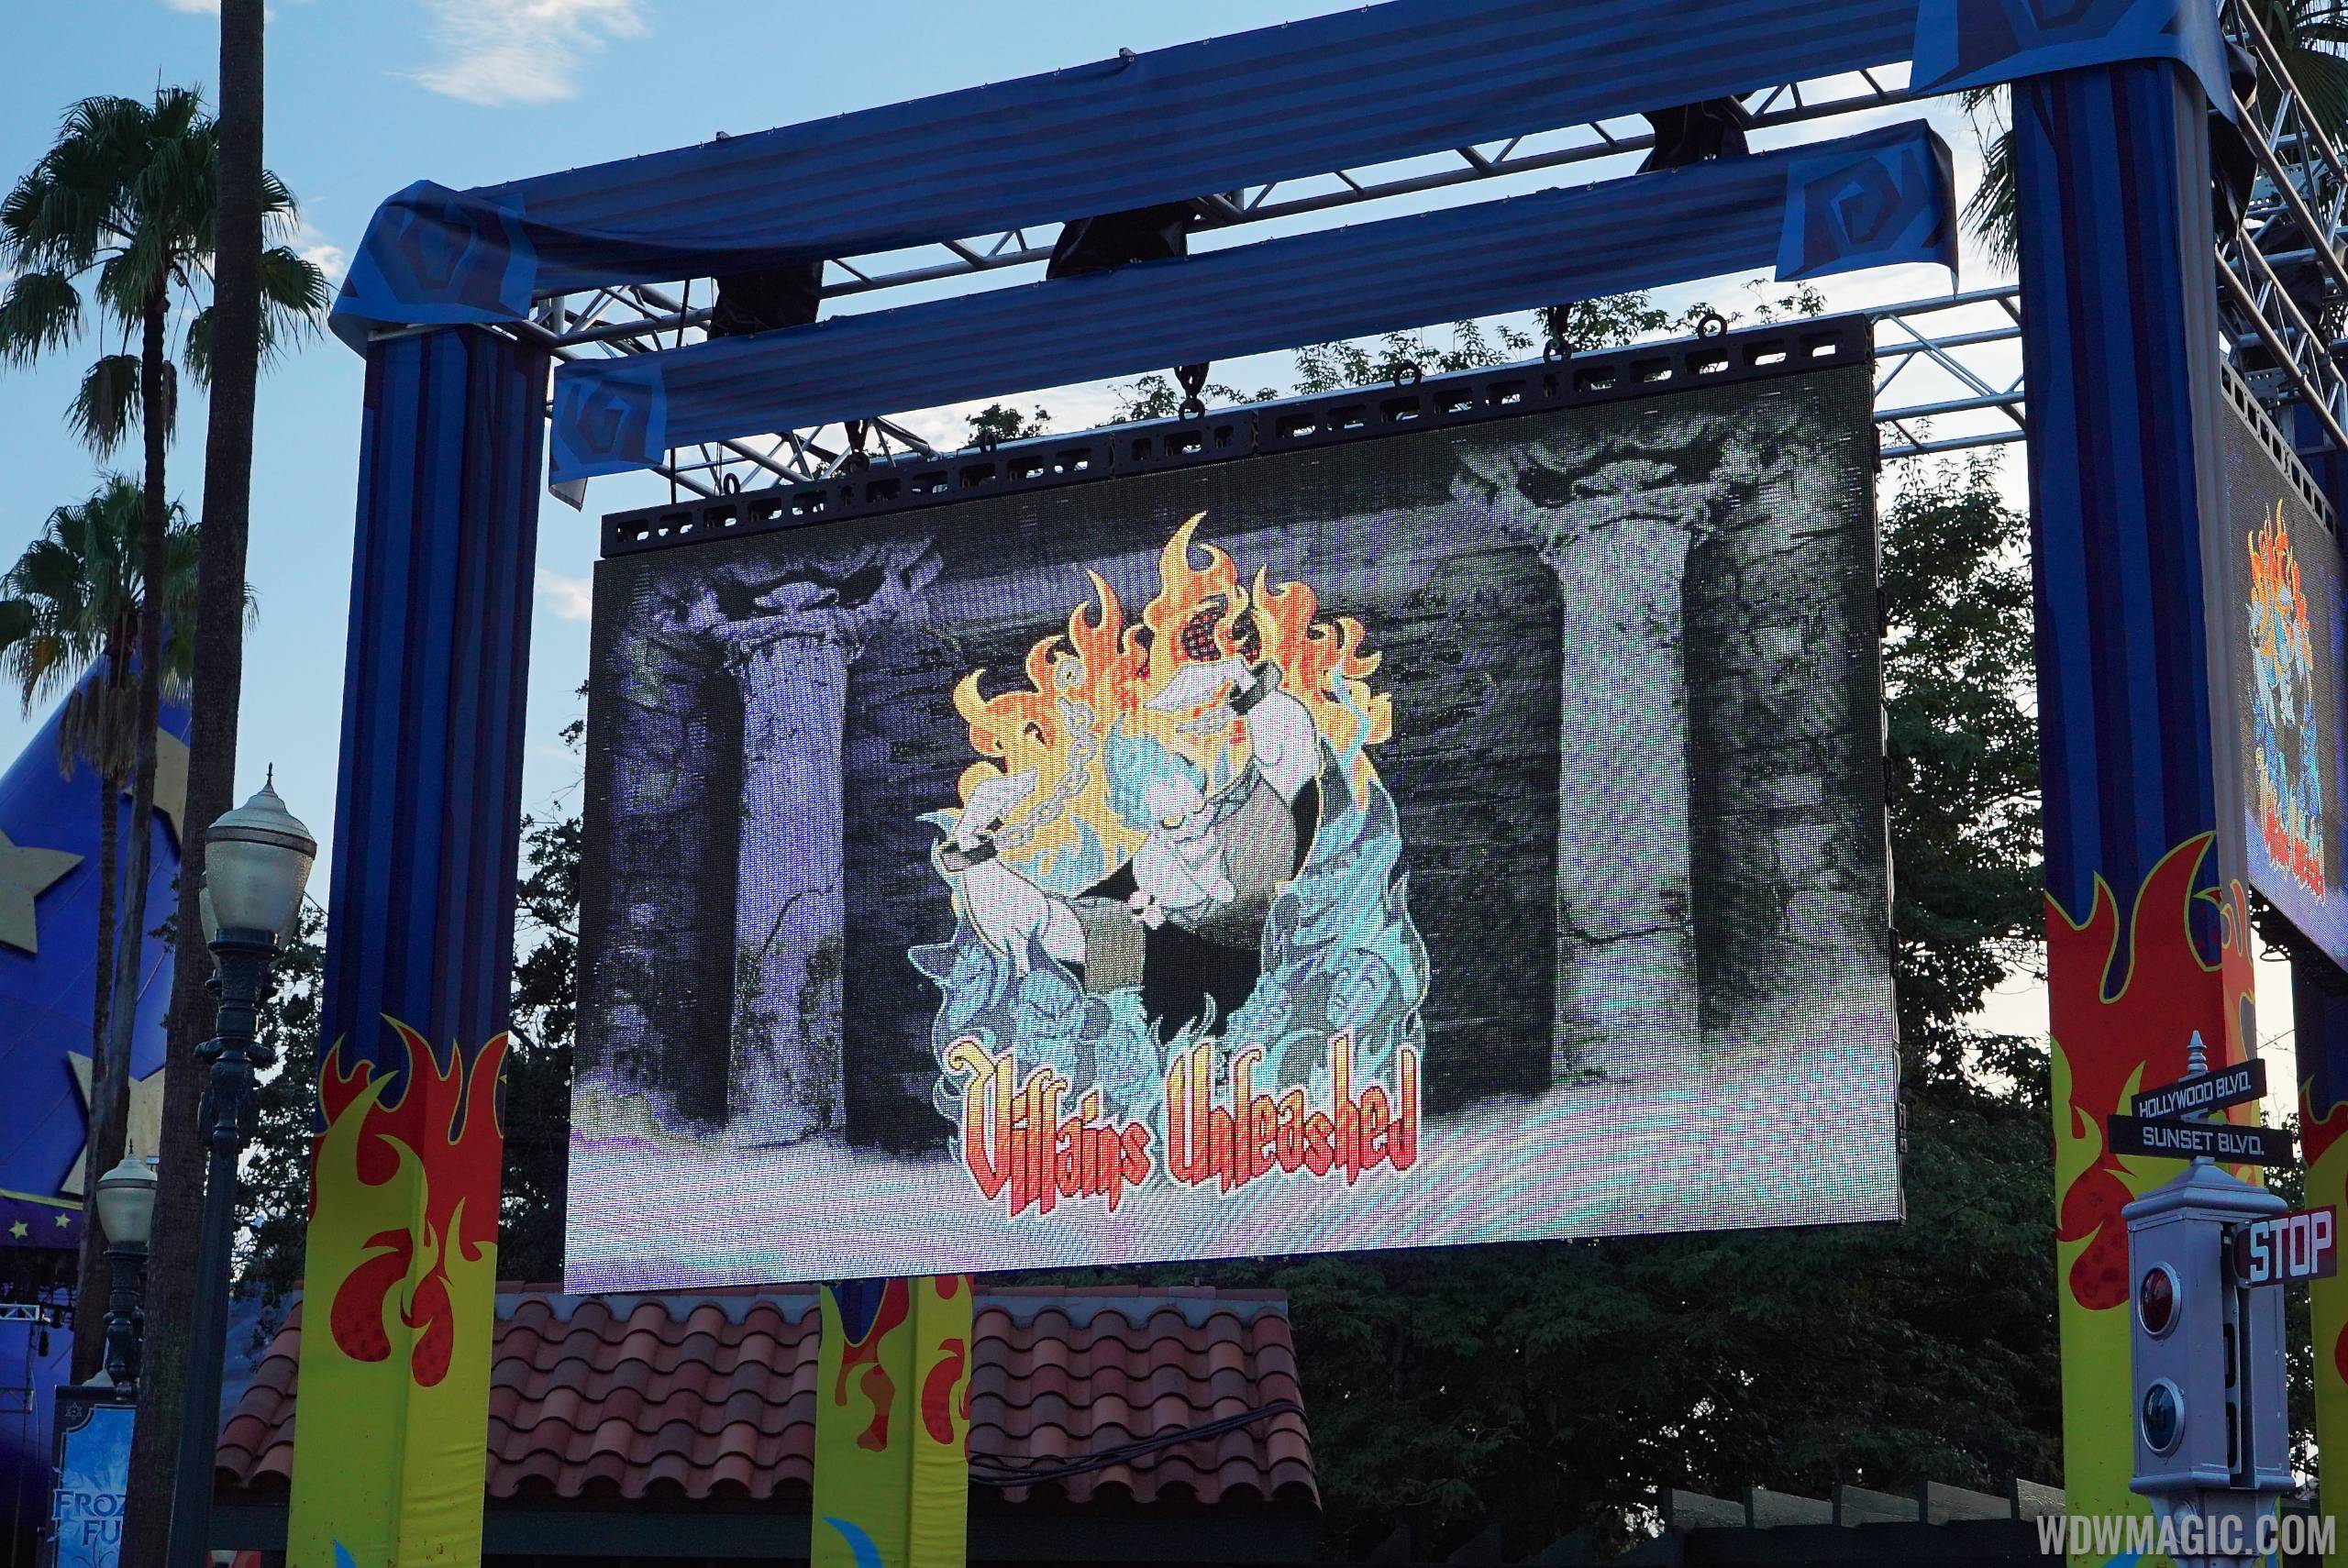 Villains Unleashed - Park decor and video screen